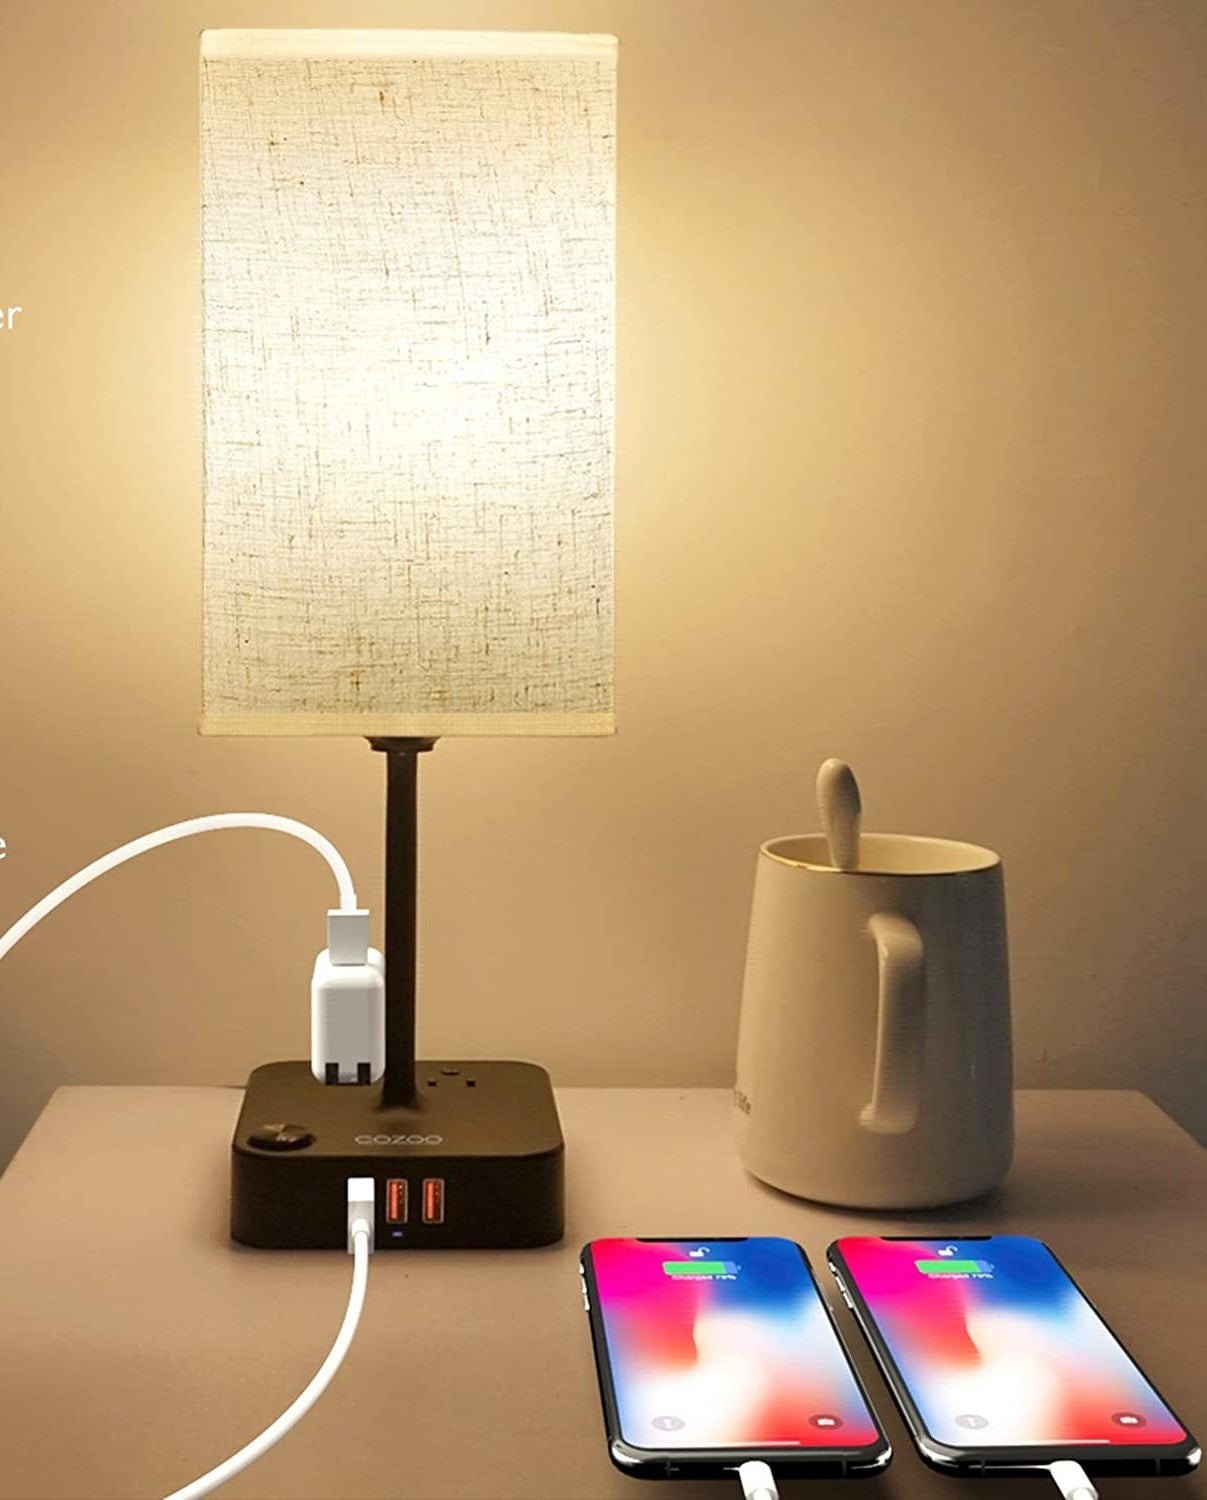 The lamp on a bed side table beside a mug and two charging phones